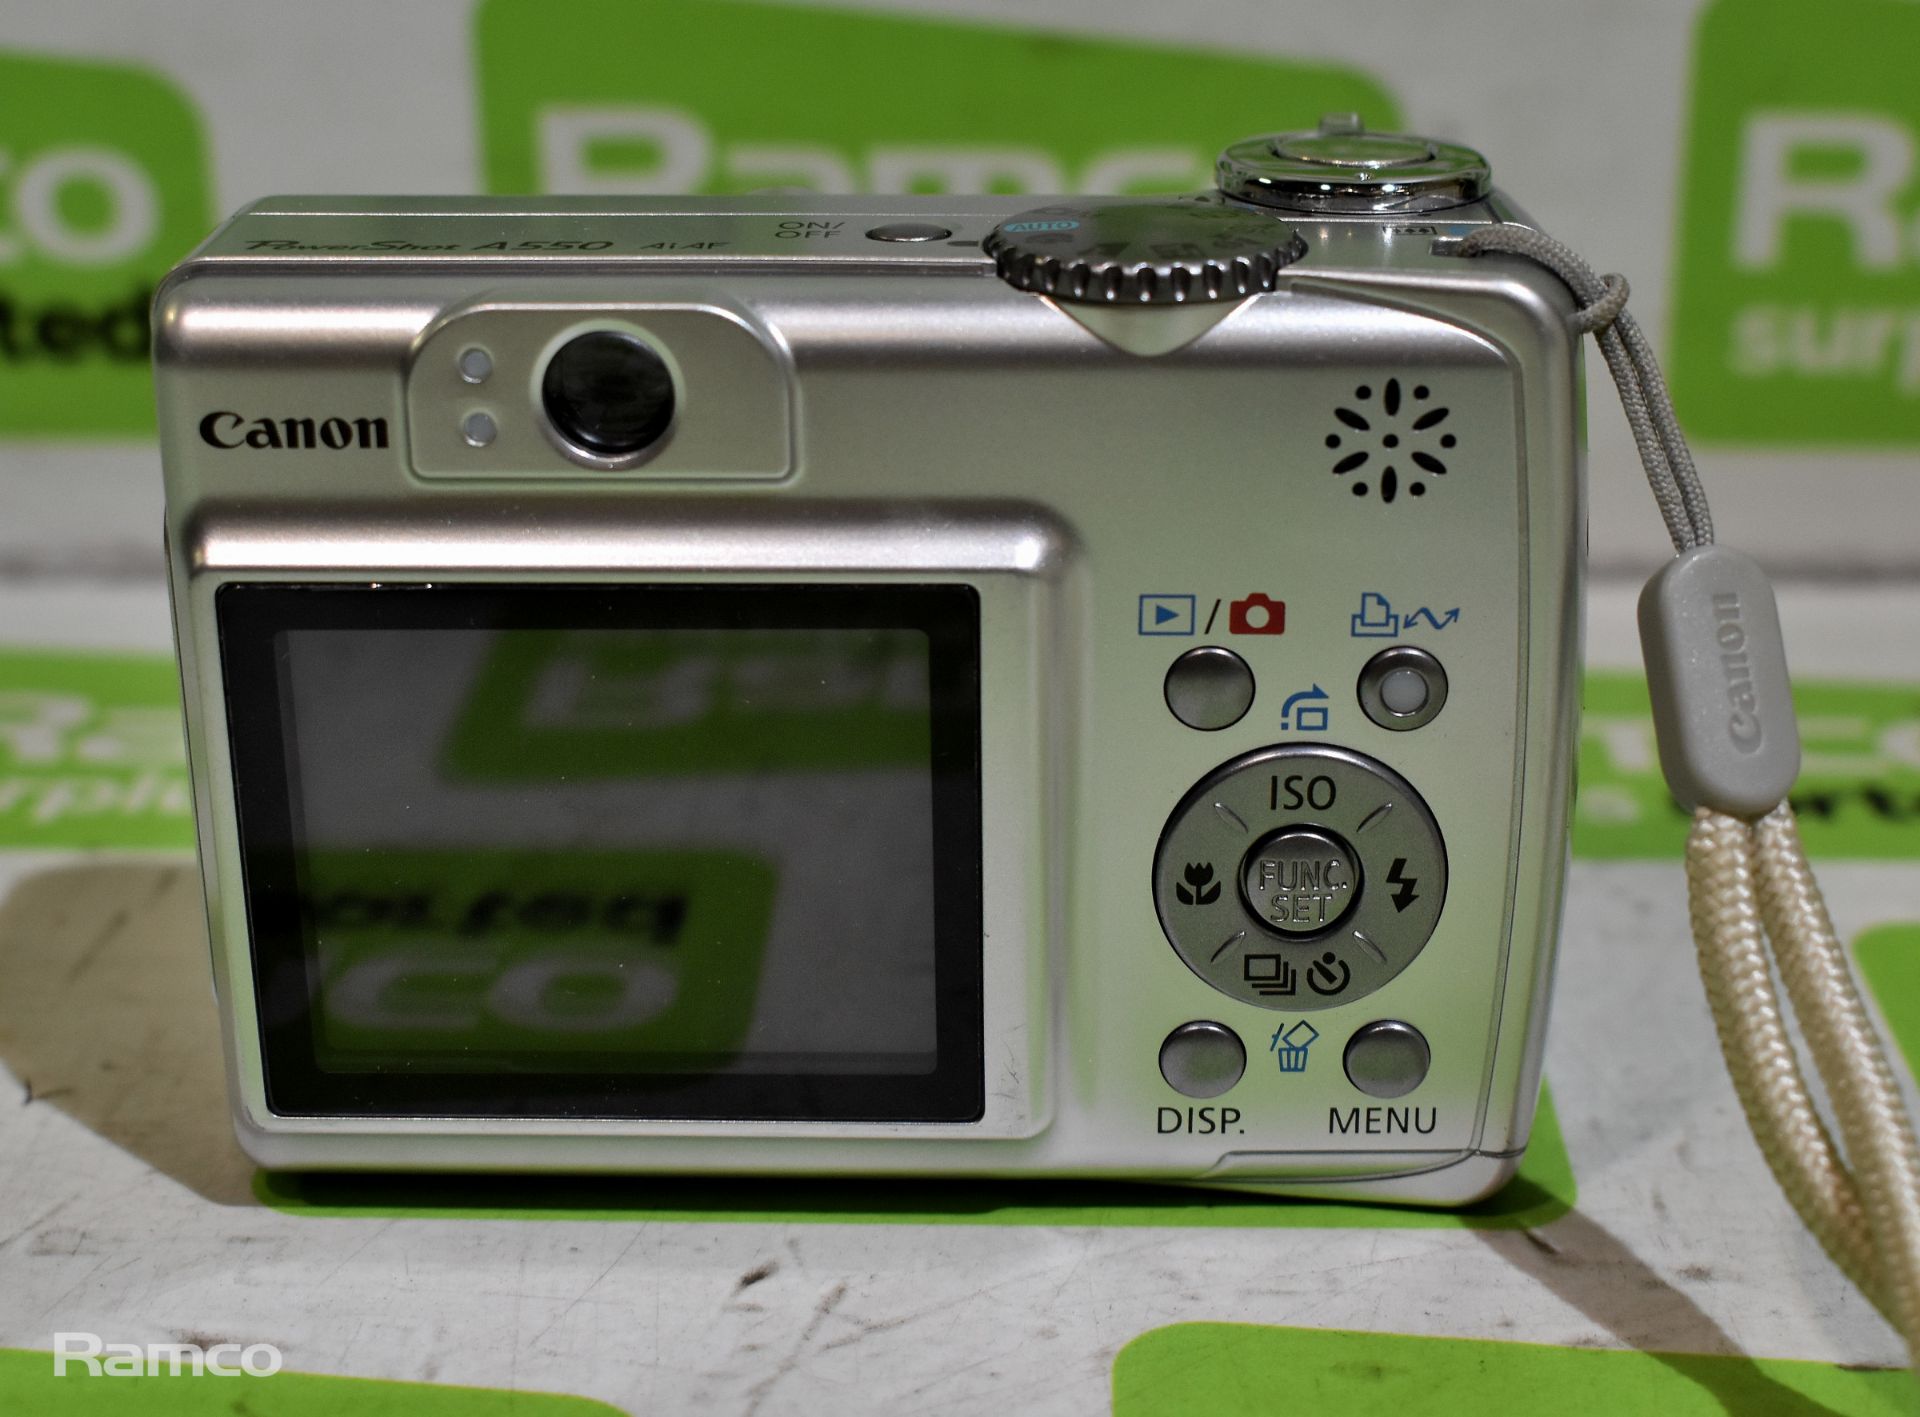 Canon Powershot A550 digital camera, boxed with accessories - Image 3 of 4